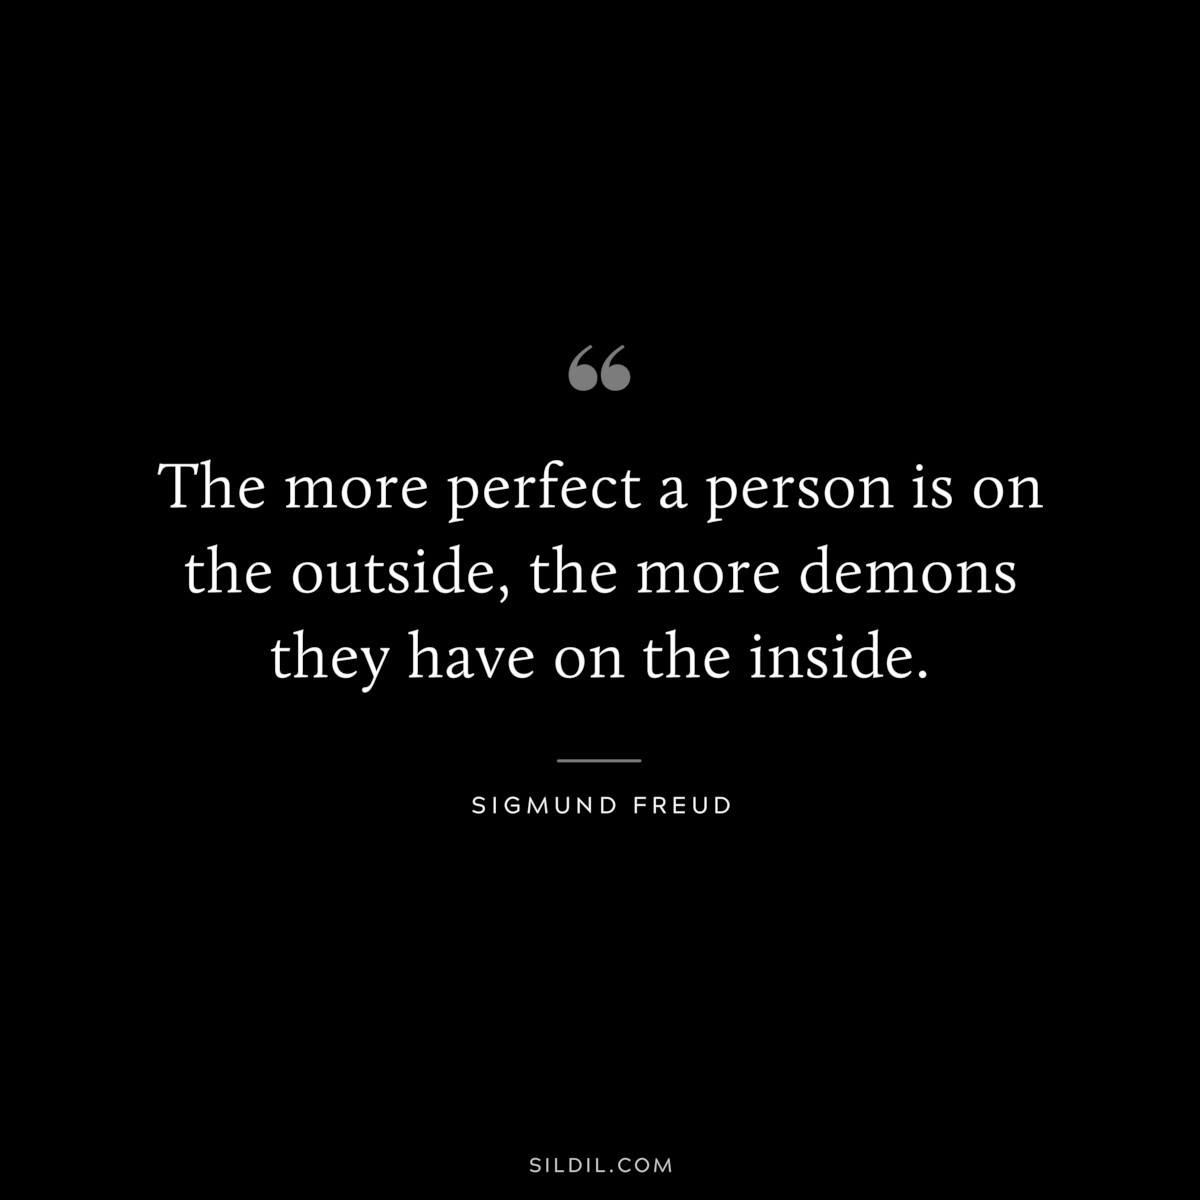 The more perfect a person is on the outside, the more demons they have on the inside. ― Sigmund Frued